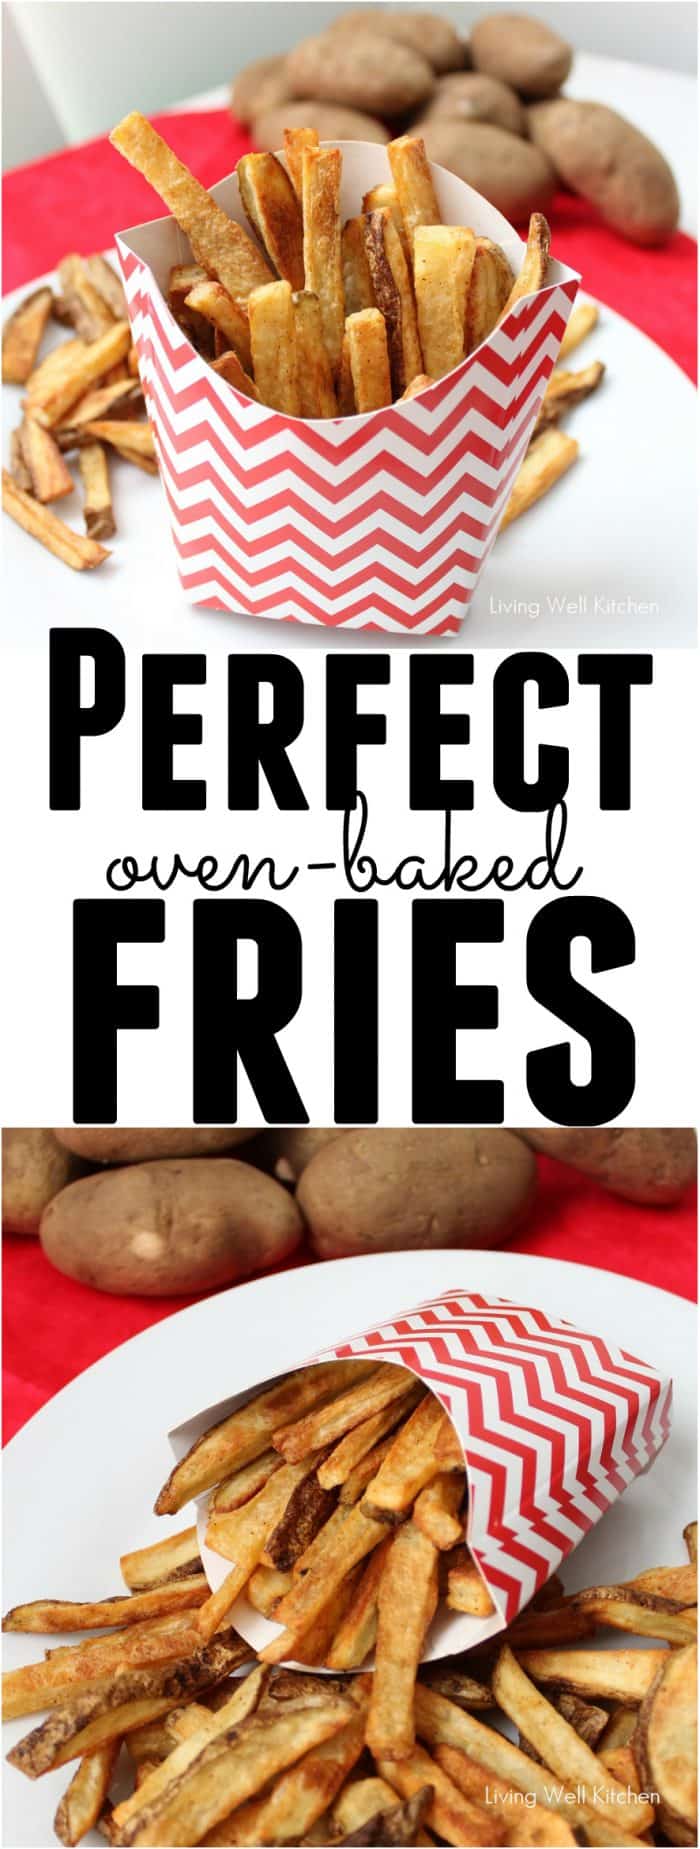 These Perfect oven-baked Fries from @memeinge are oven baked but still crispy on the outside and soft inside thanks to a few tips and tricks. This recipe includes all you need to know to have Perfect Baked Fries